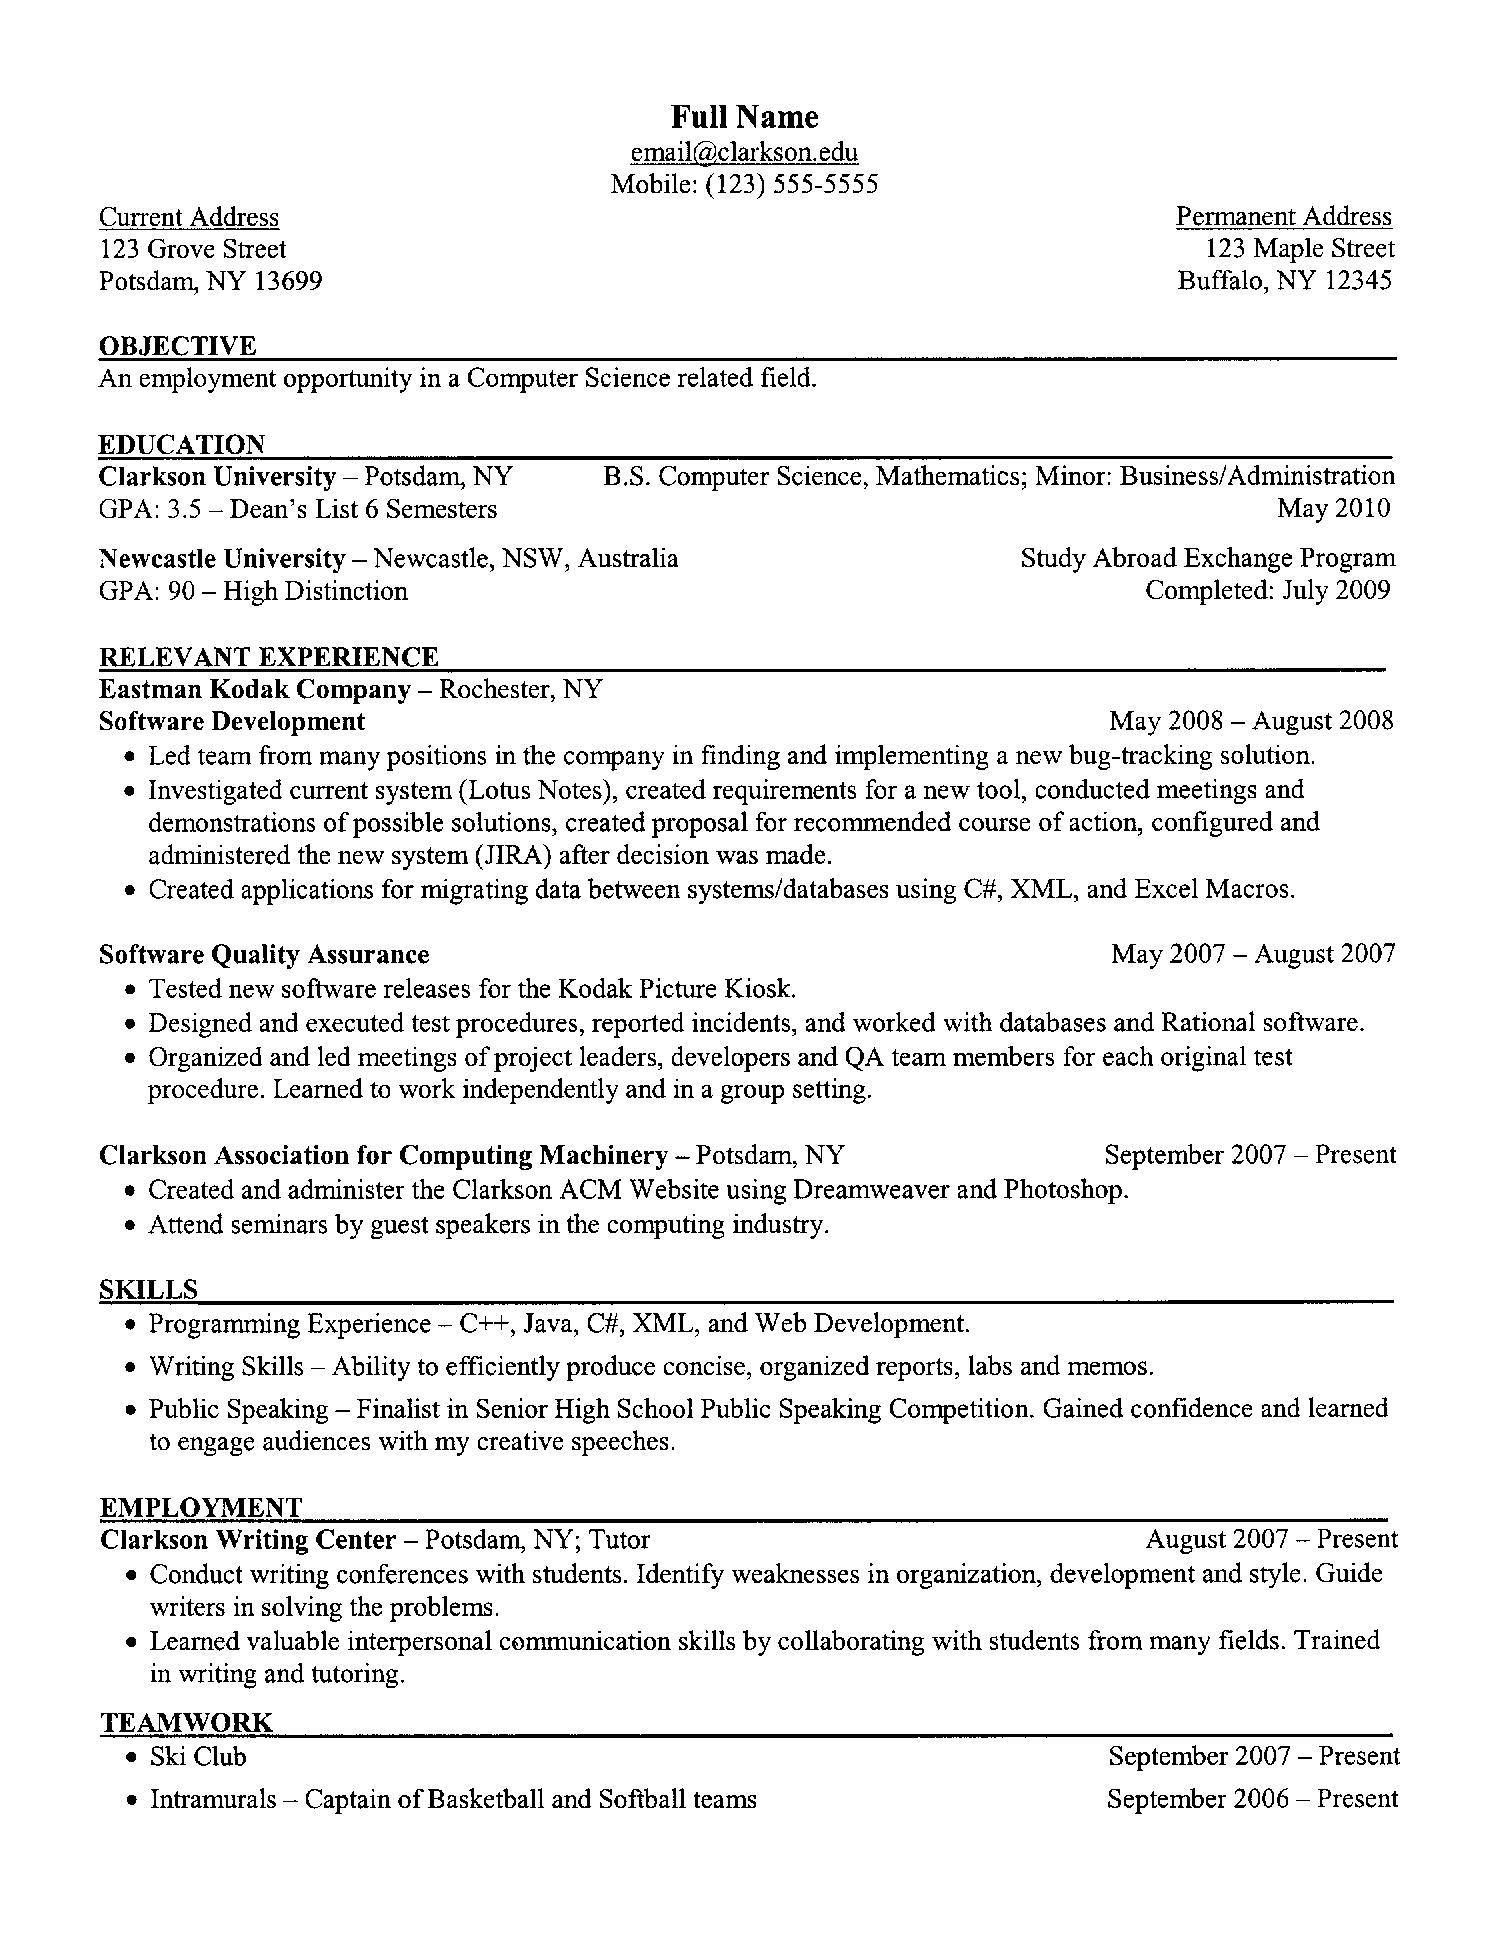 Sample Resume for Computer Science Fresh Graduates Resume Templates Computer Science – Resume Templates Student …